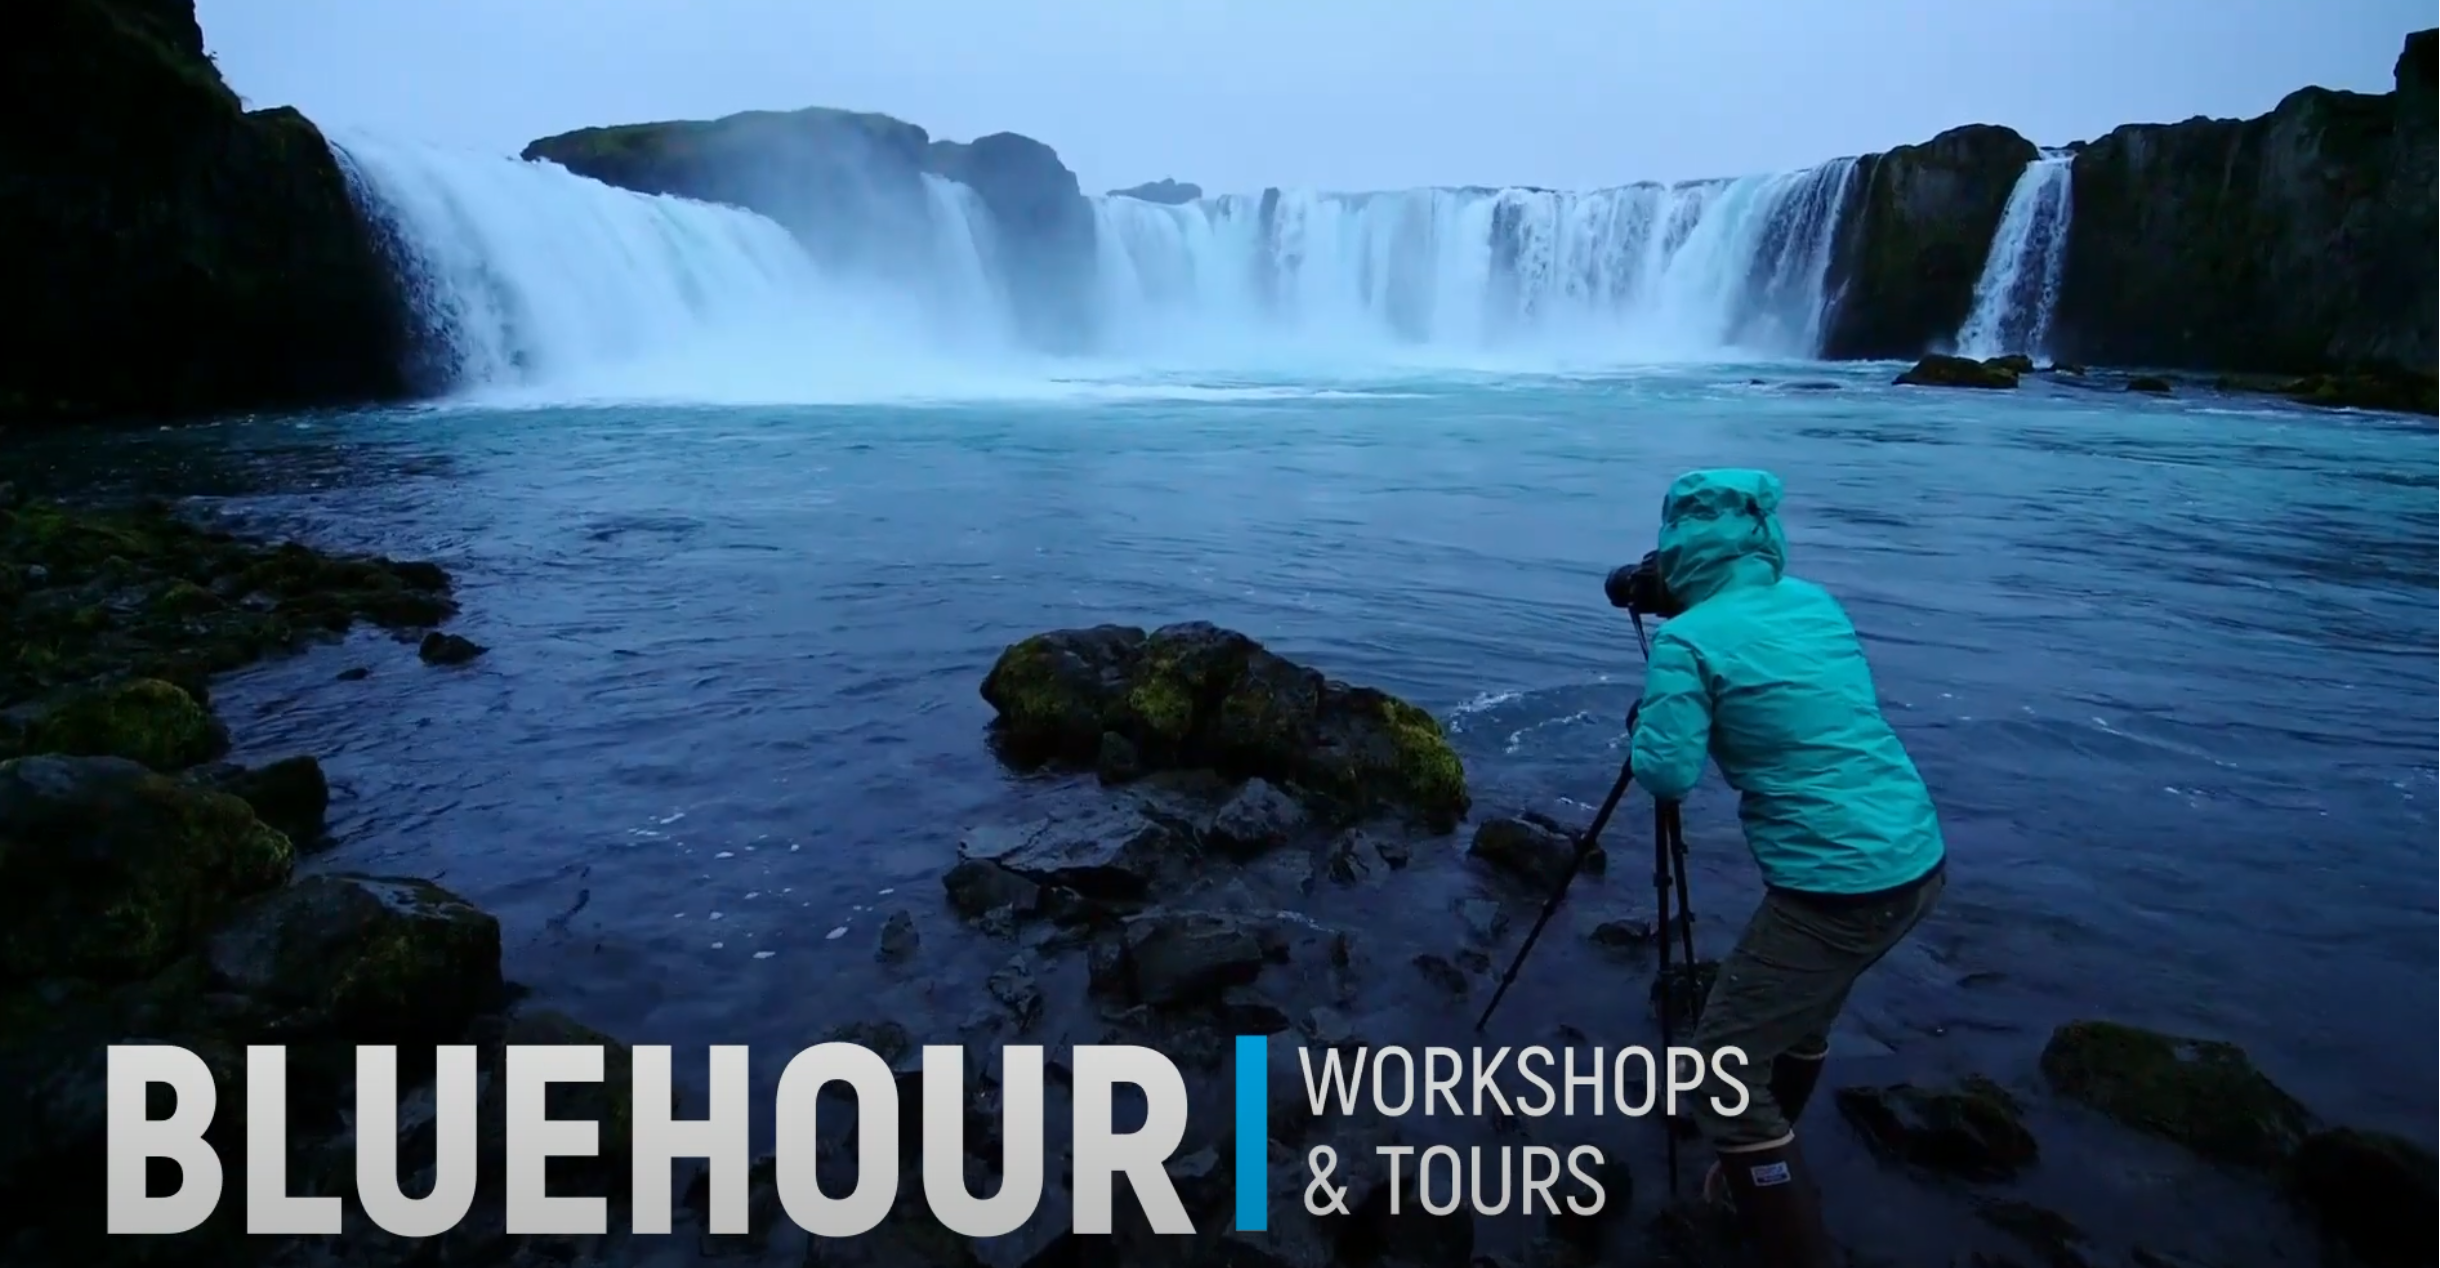 Load video: Promotional video for BlueHour Photo Ventures showing clips from their adventures